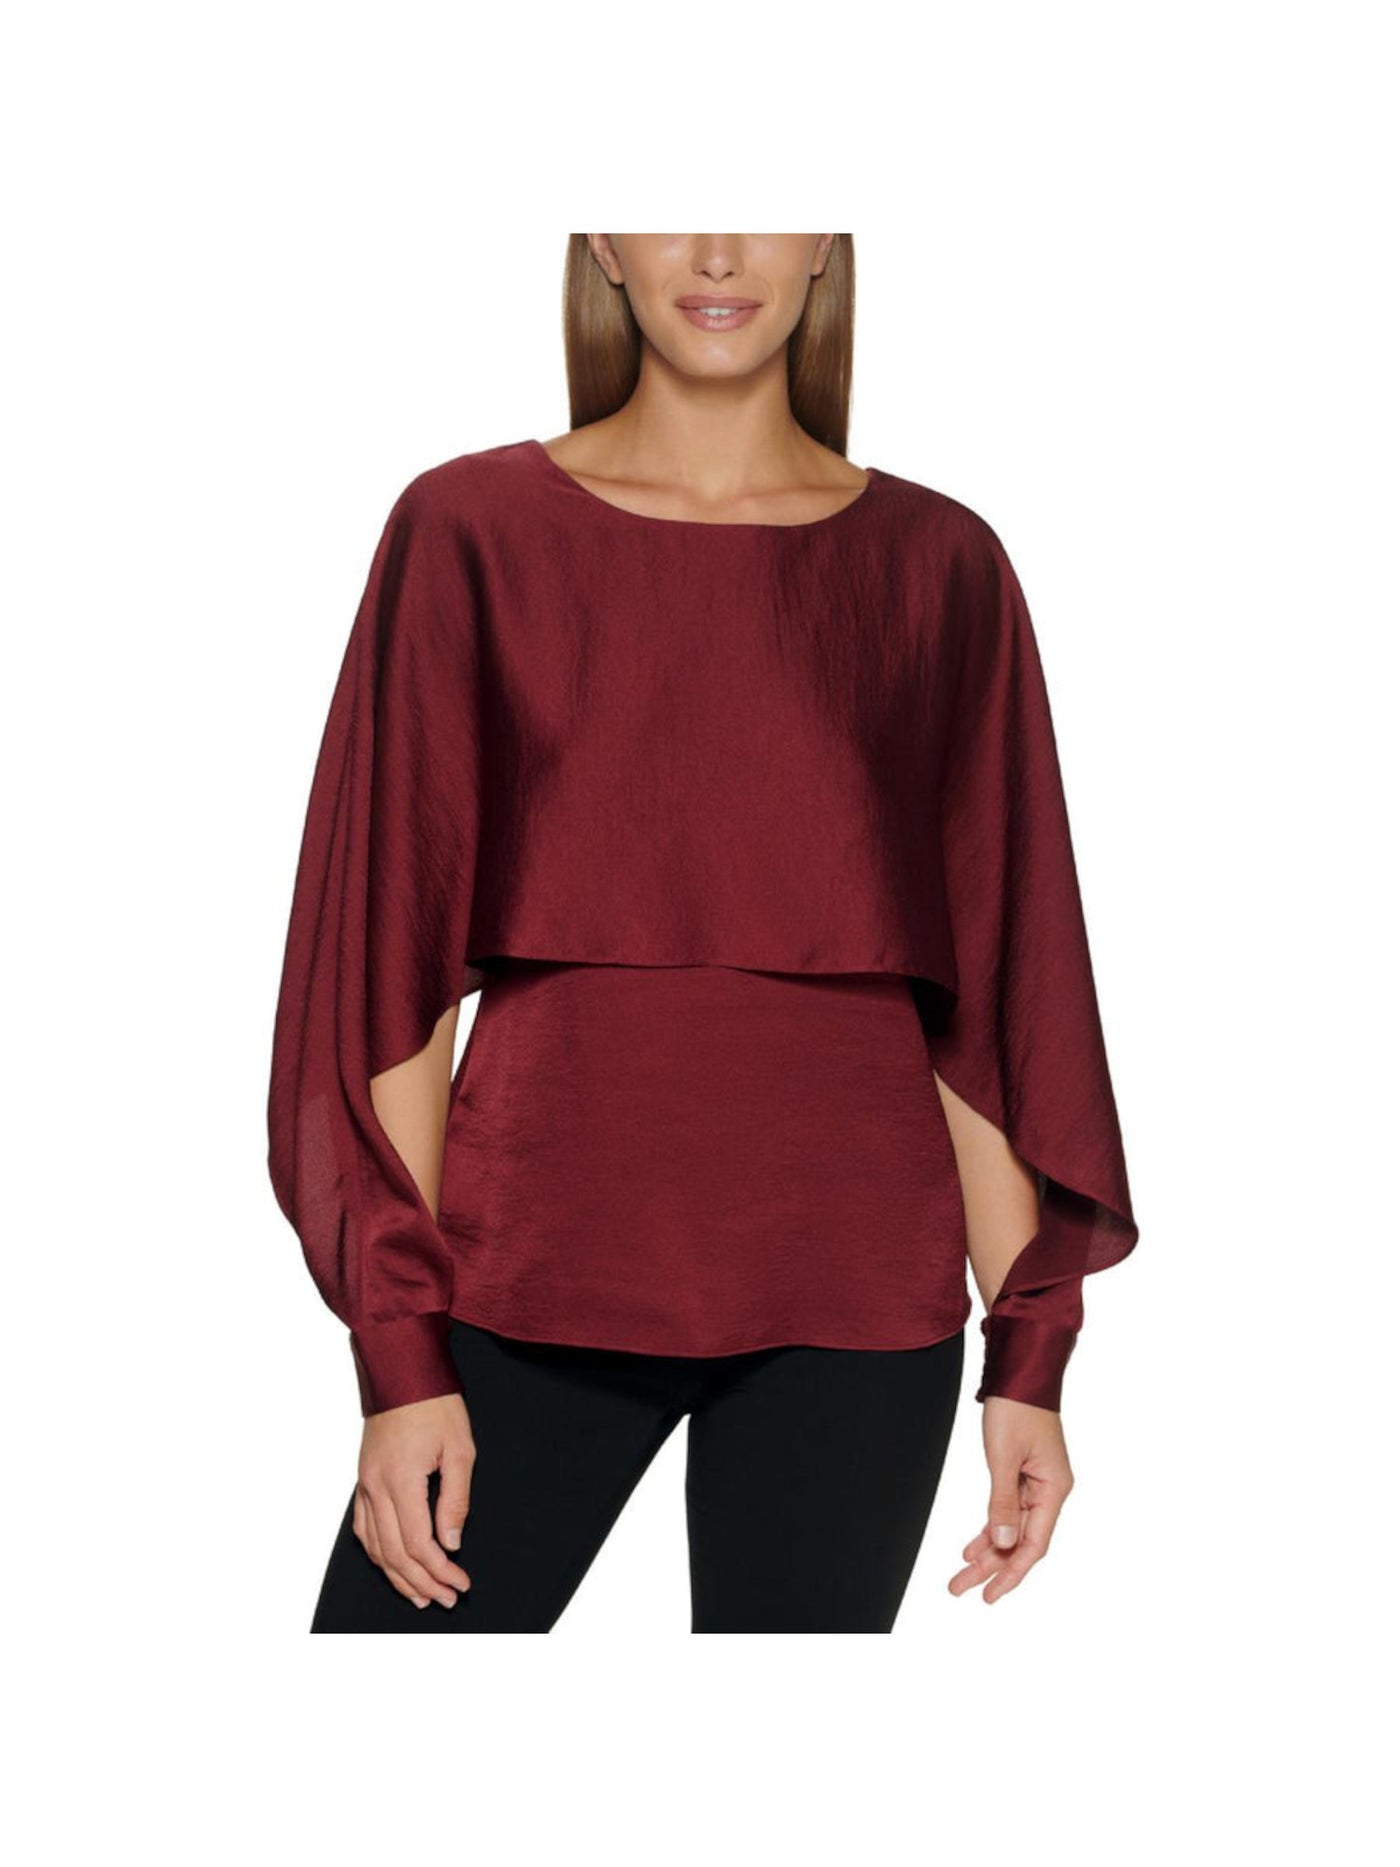 DKNY Womens Burgundy Smocked Long Split Sleeves Cape Style Round Neck Top S